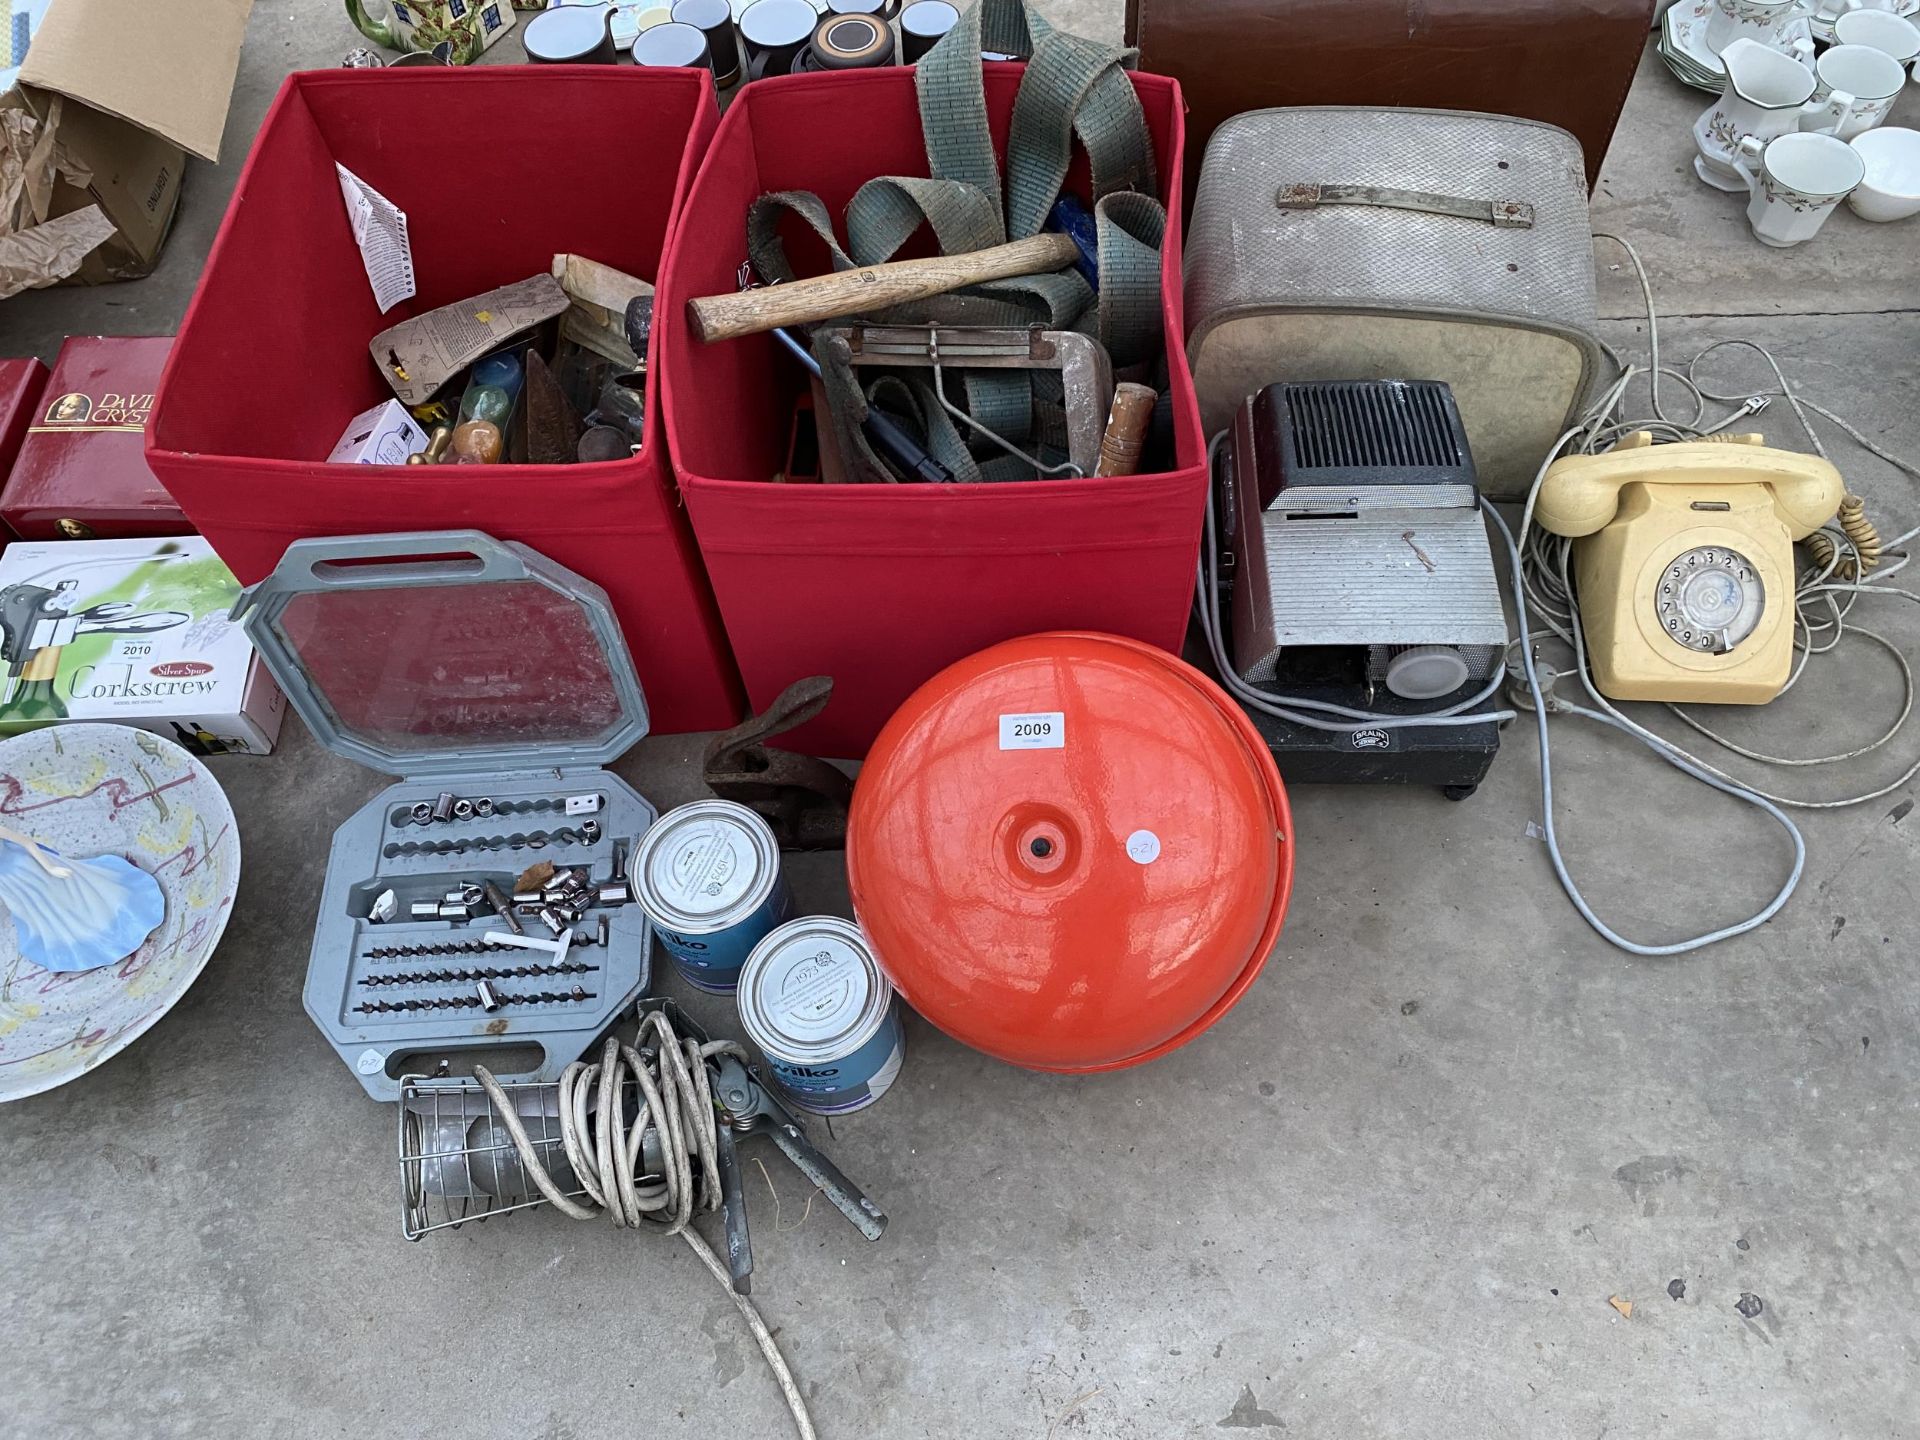 AN ASSORTMENT OF ITEMS TO INCLUDE A DIAL TELEPHONE, PROJECTOR AND STAMP ETC